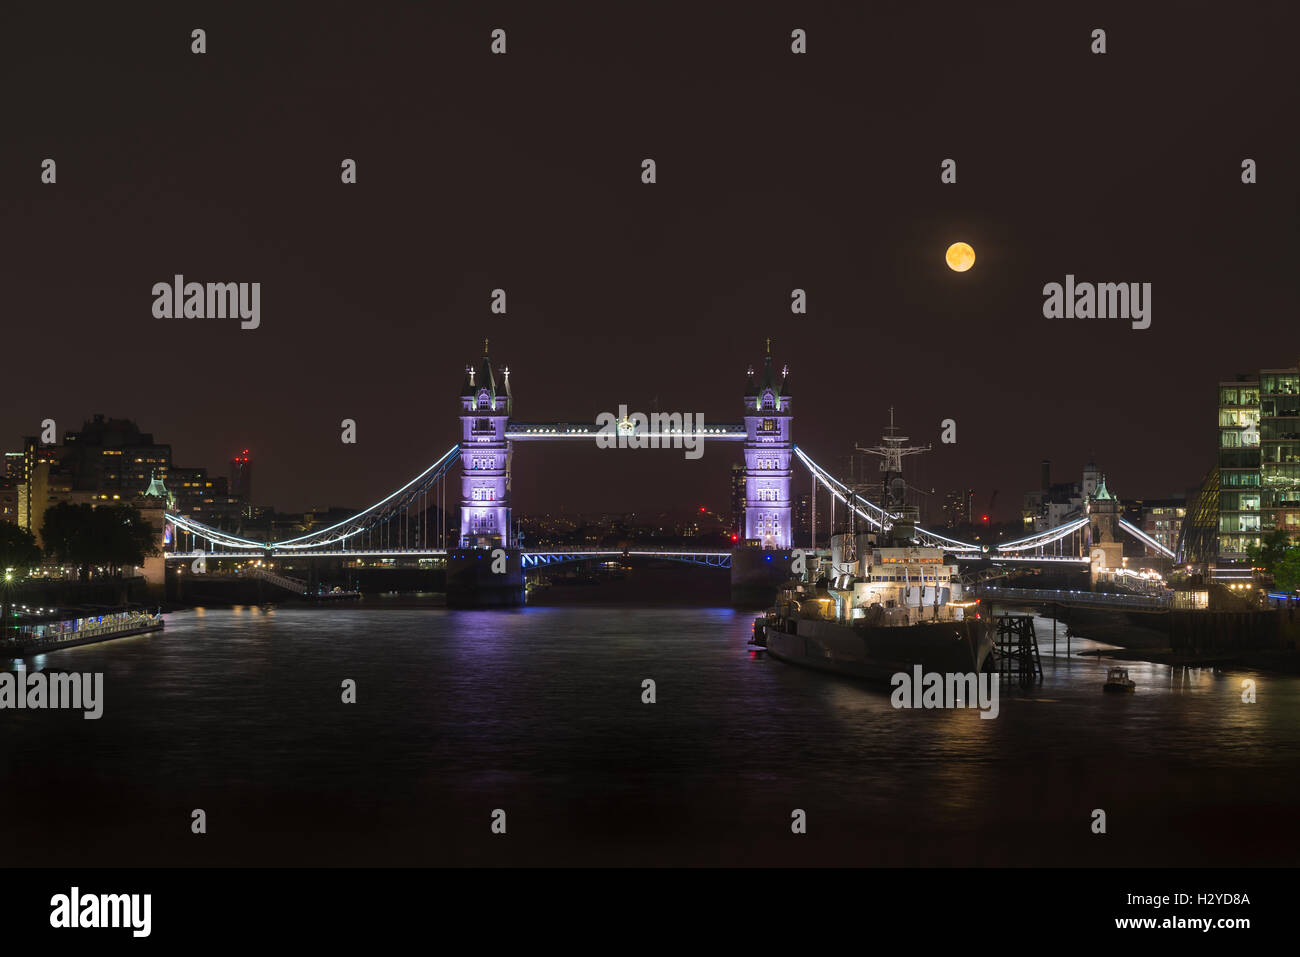 Full moon rising over the illuminated Tower Bridge, the HMS Belfast museum ship and the River Thames, London, UK Stock Photo